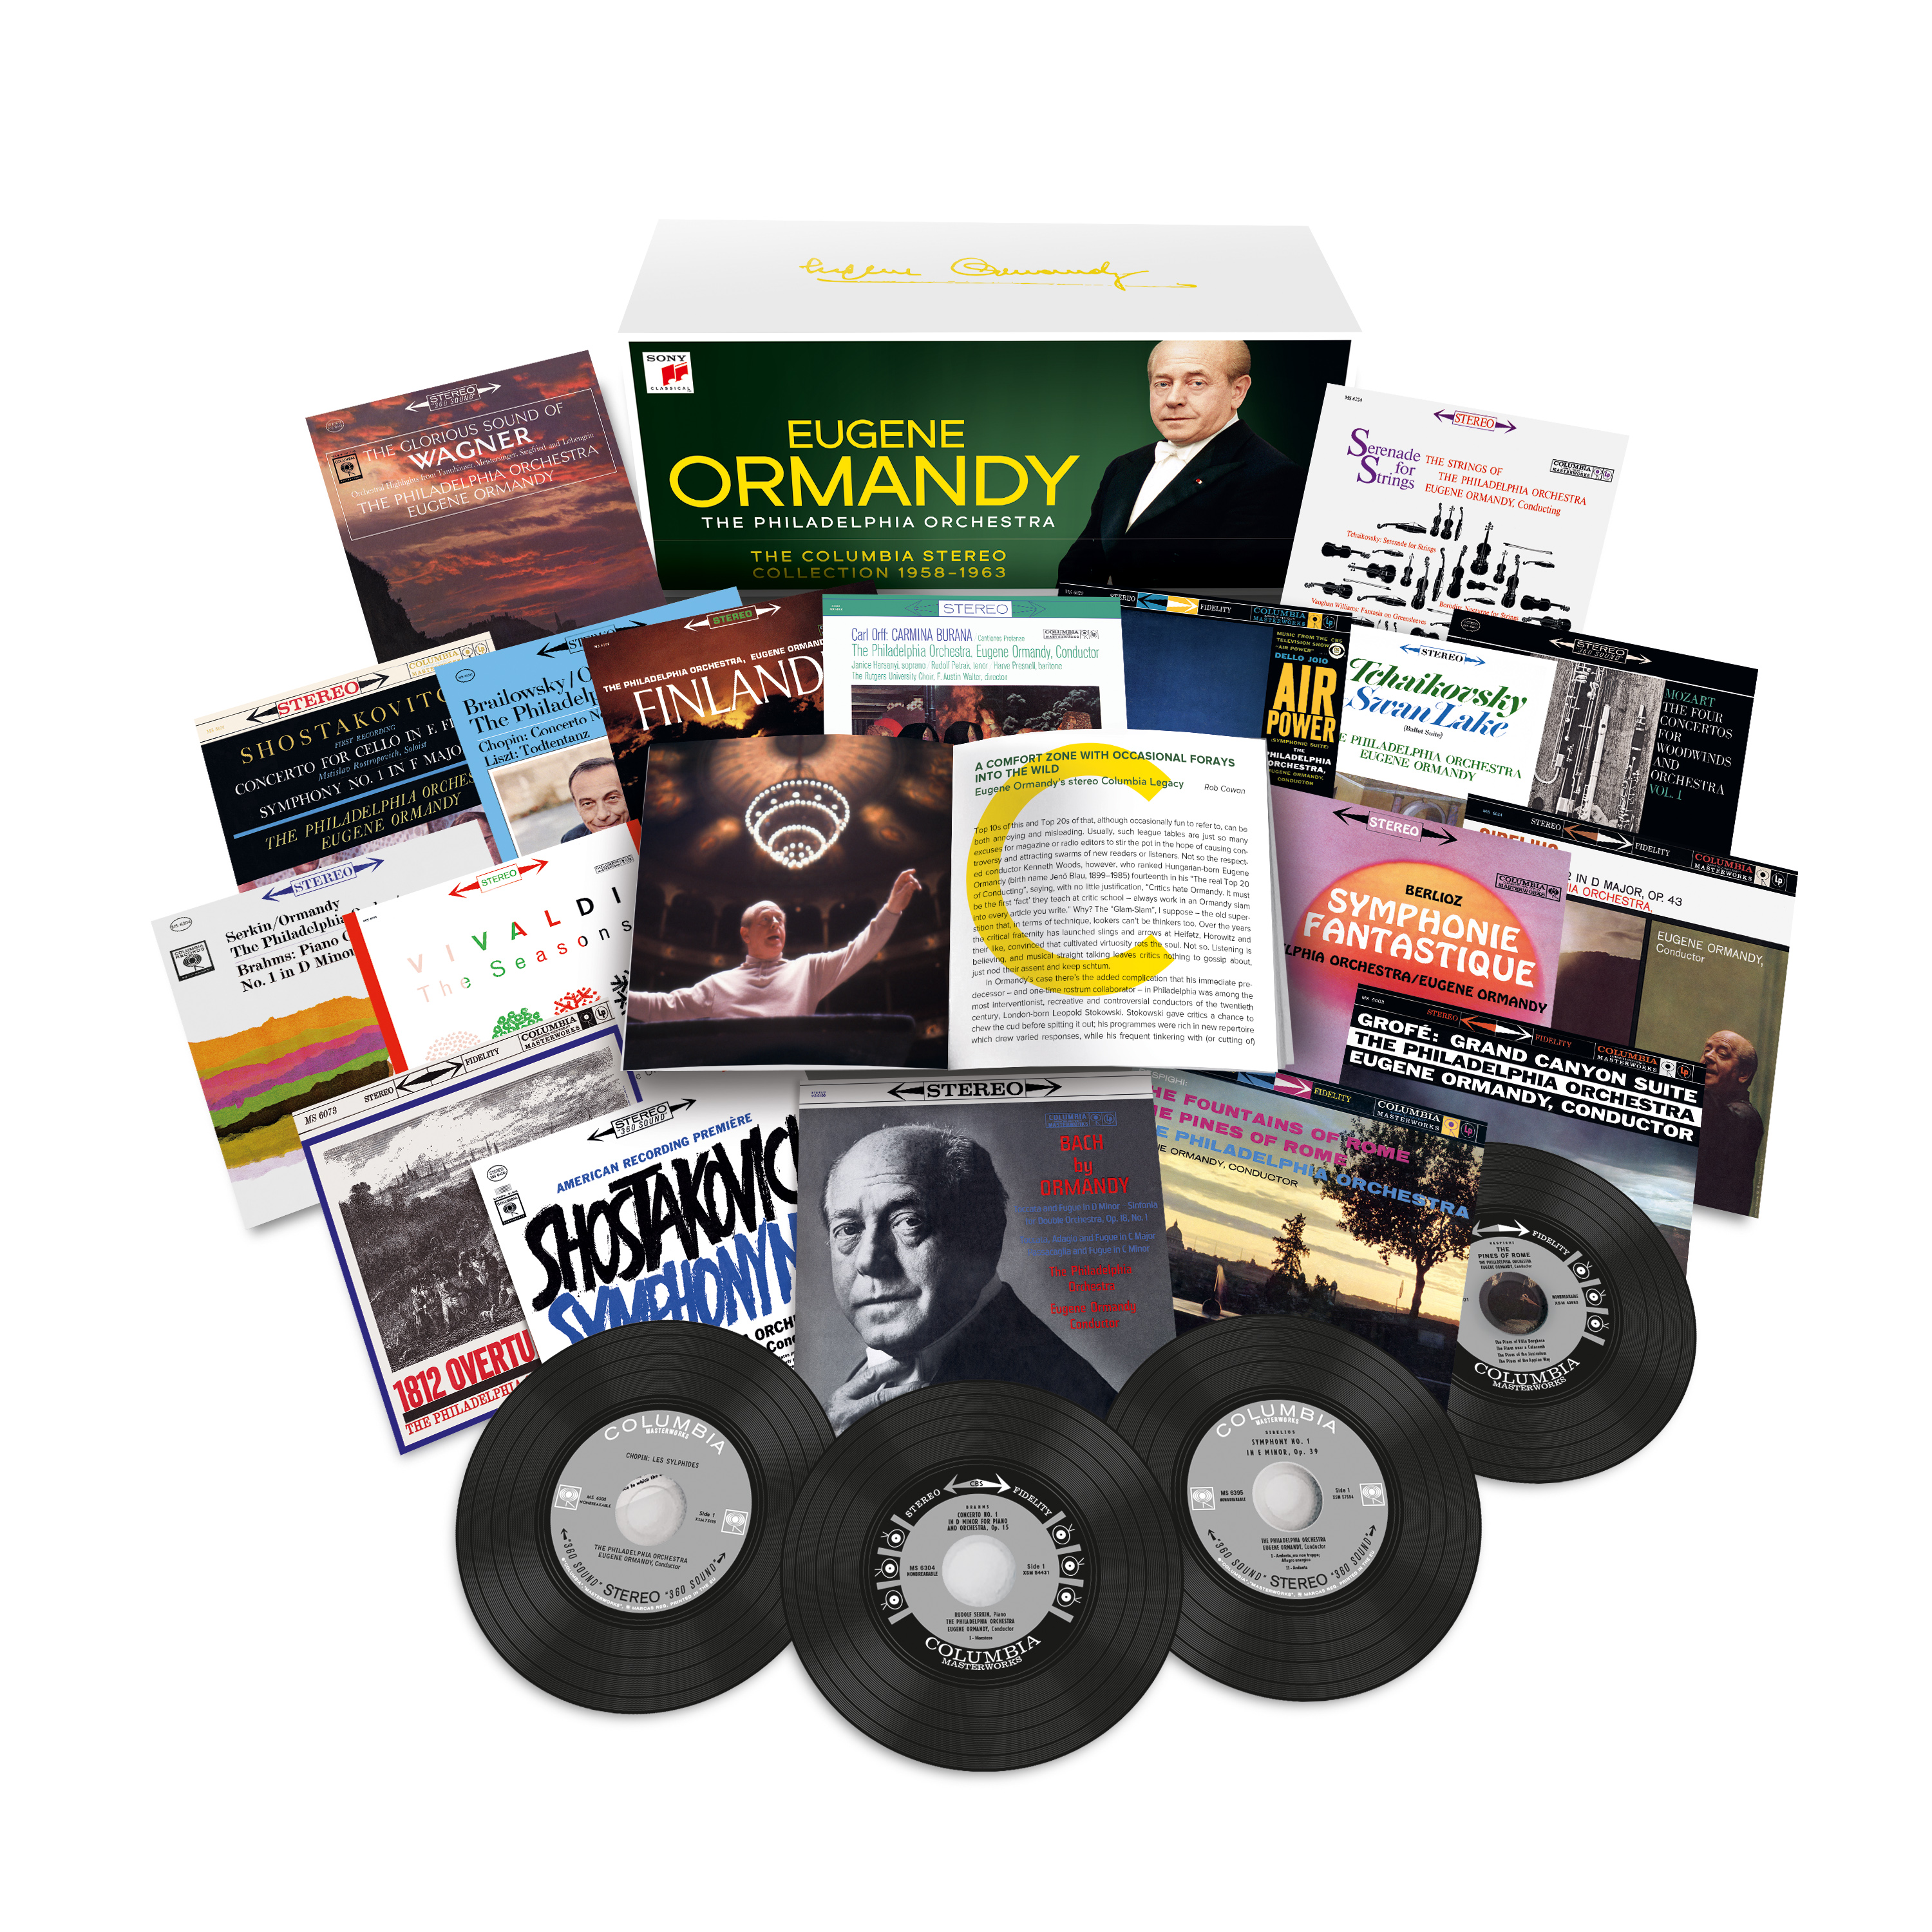 Ormandy/Collection